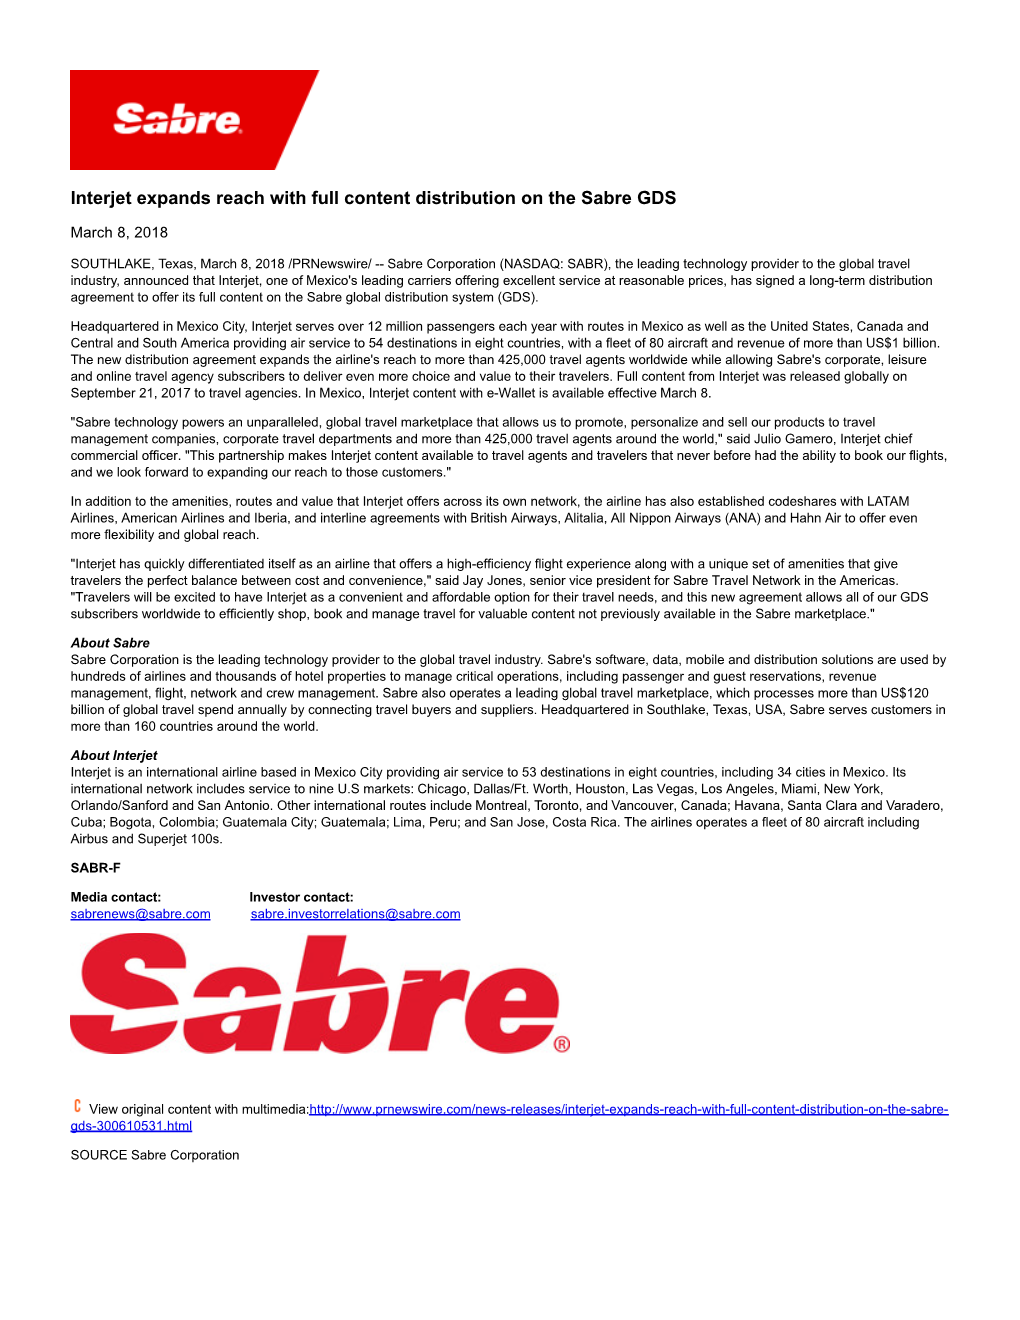 Interjet Expands Reach with Full Content Distribution on the Sabre GDS